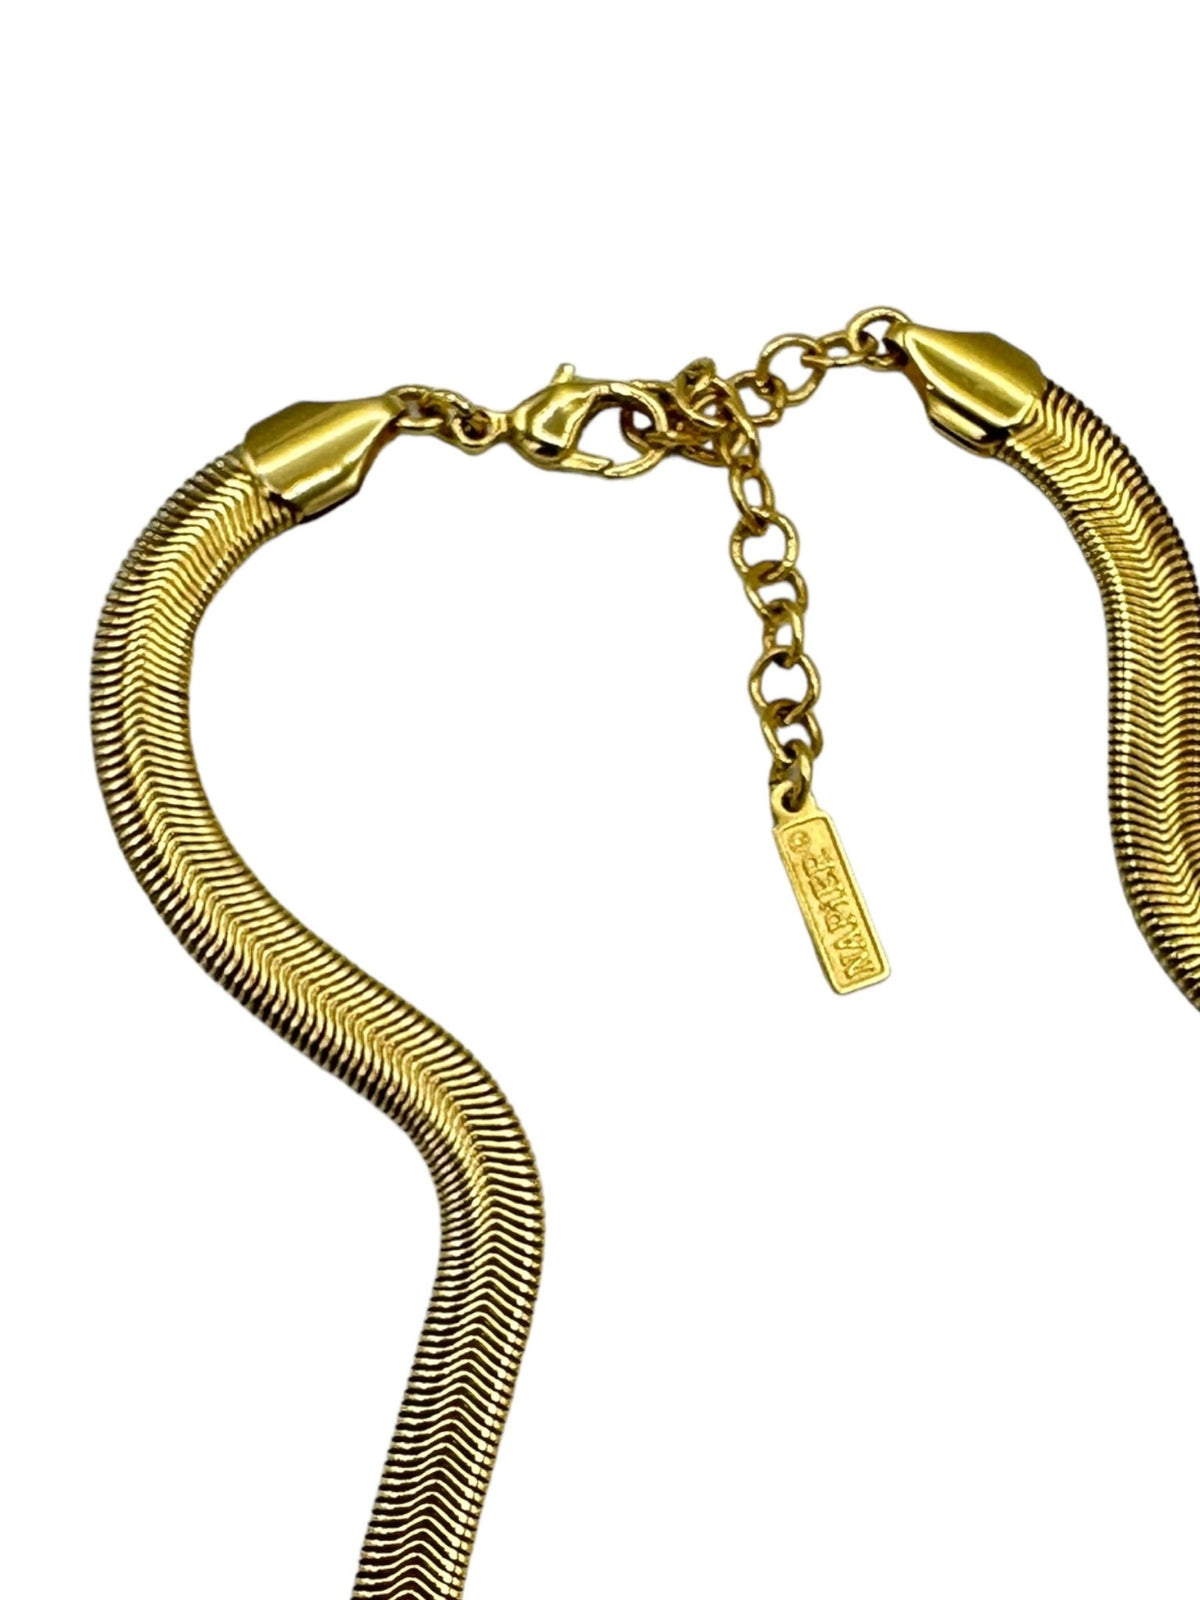 Napier Vintage Jewelry Gold Flat Snake Chain Layering Necklace - 24 Wishes Vintage Jewelry